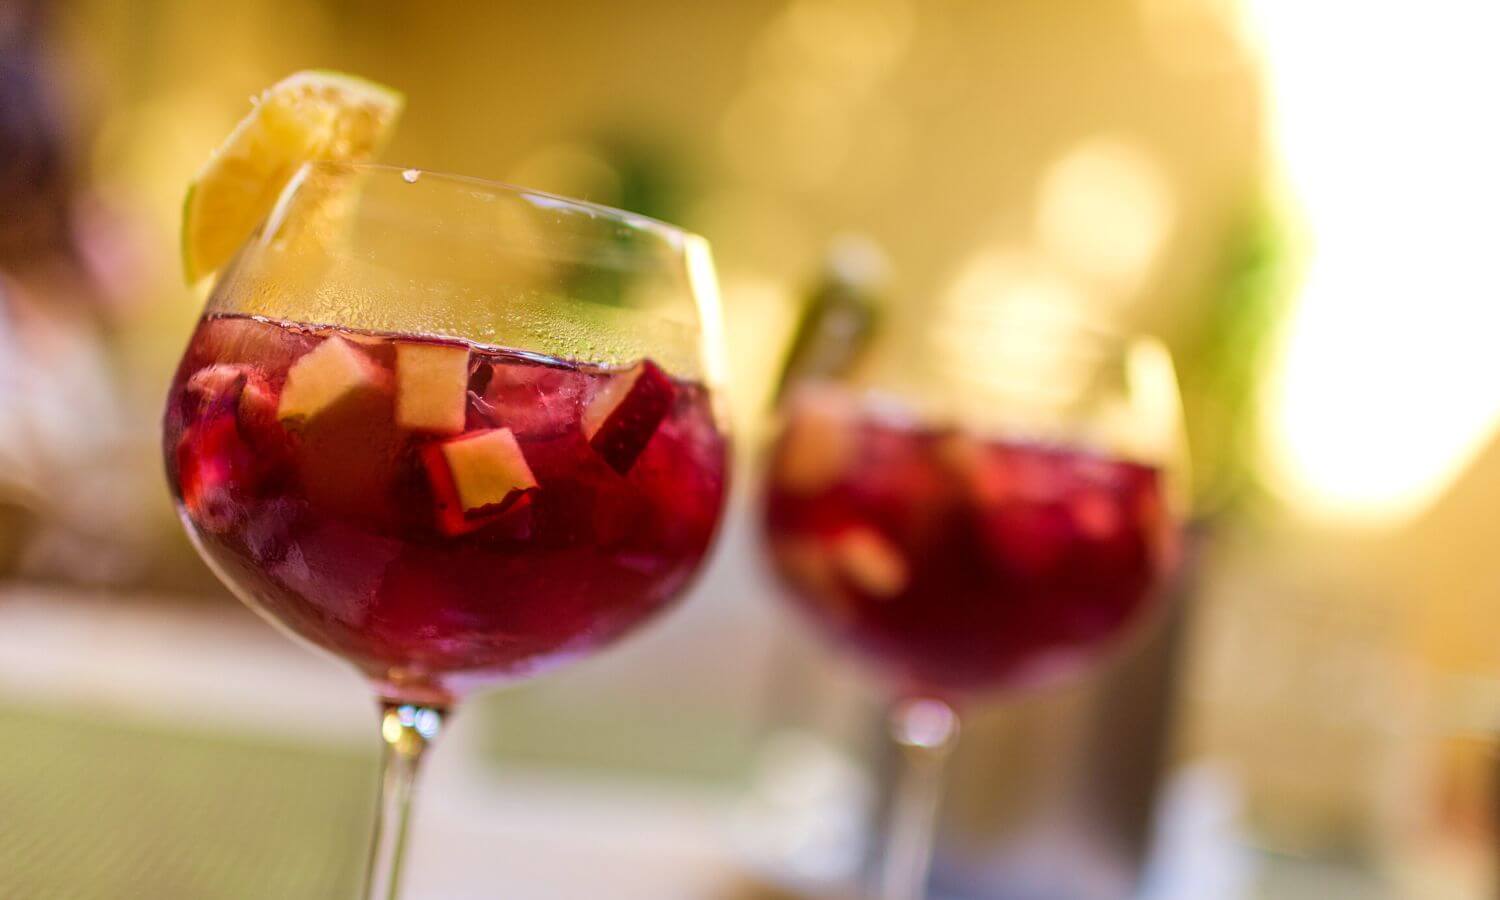 Clericot, a Mexican fruit and wine based drink similar to sangria.